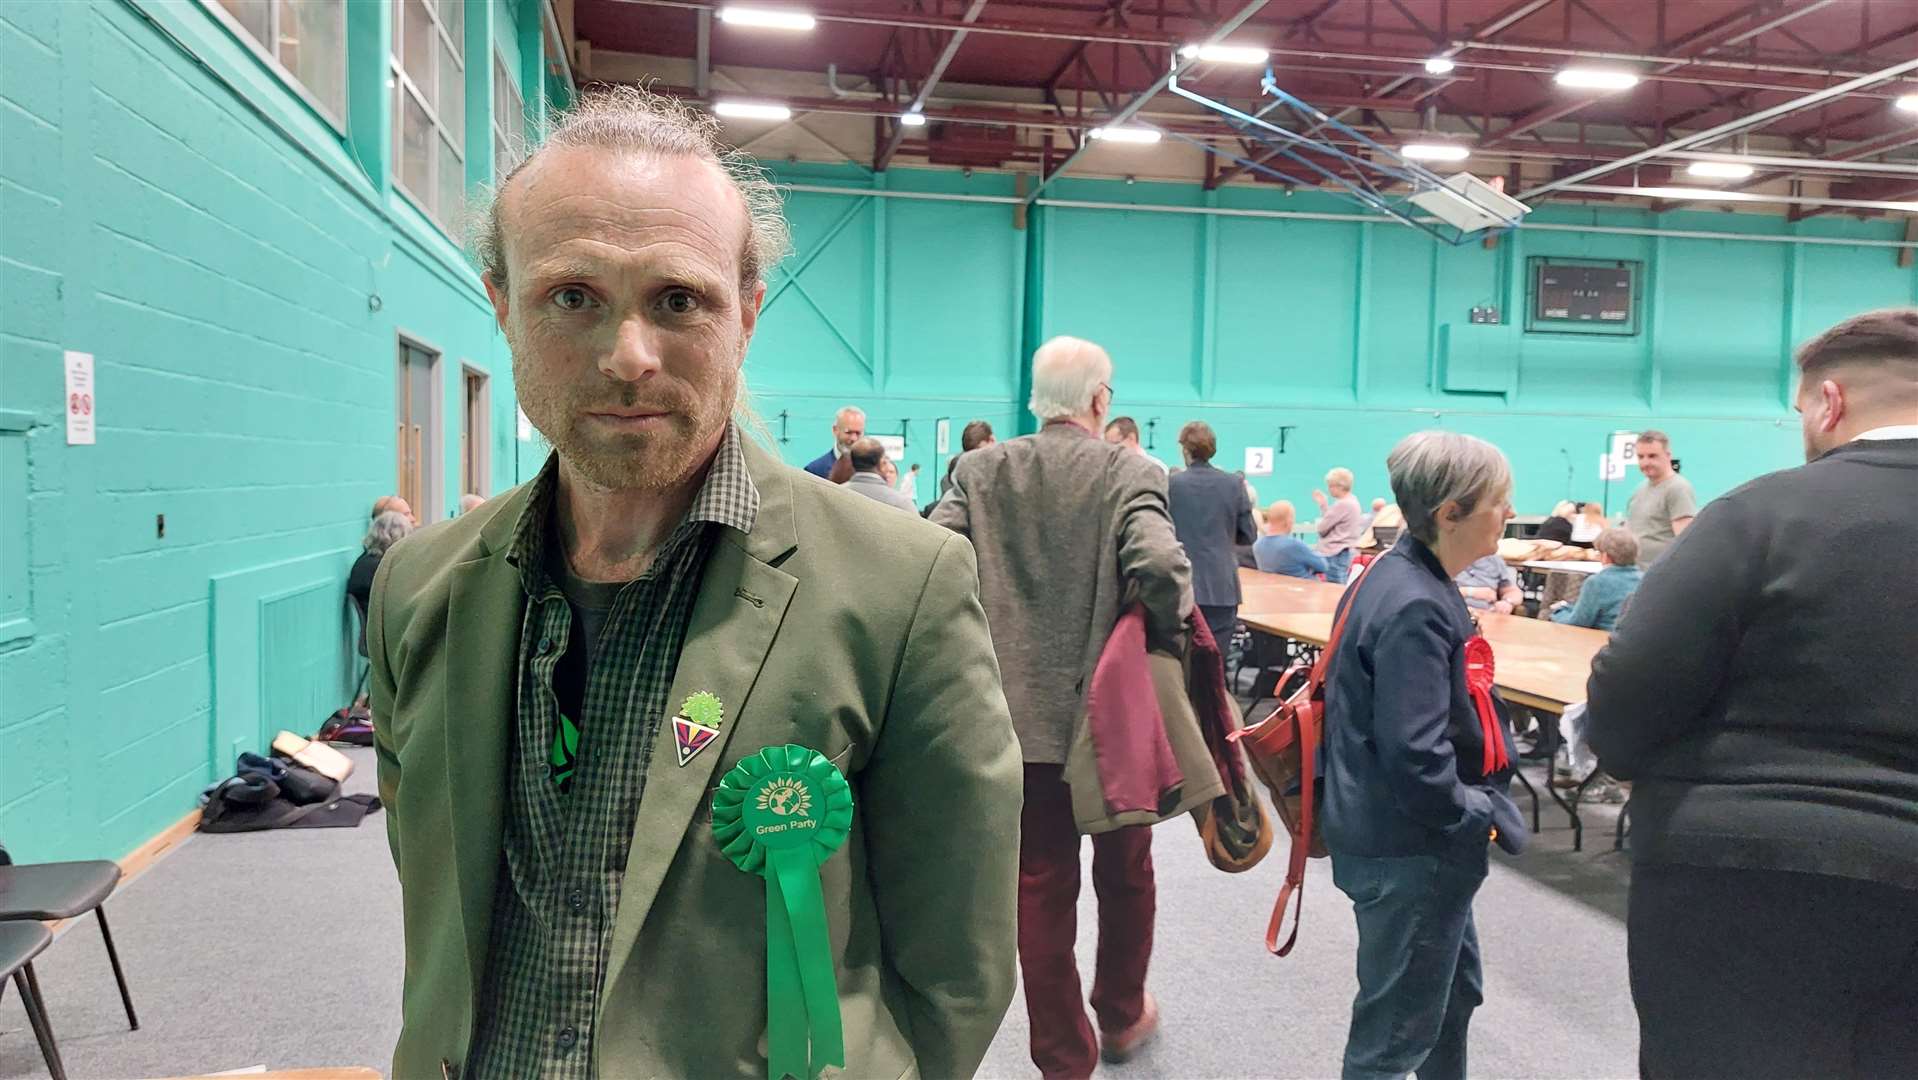 Steve Campkin from Ashford's Green Party received the highest number of votes out of any candidate